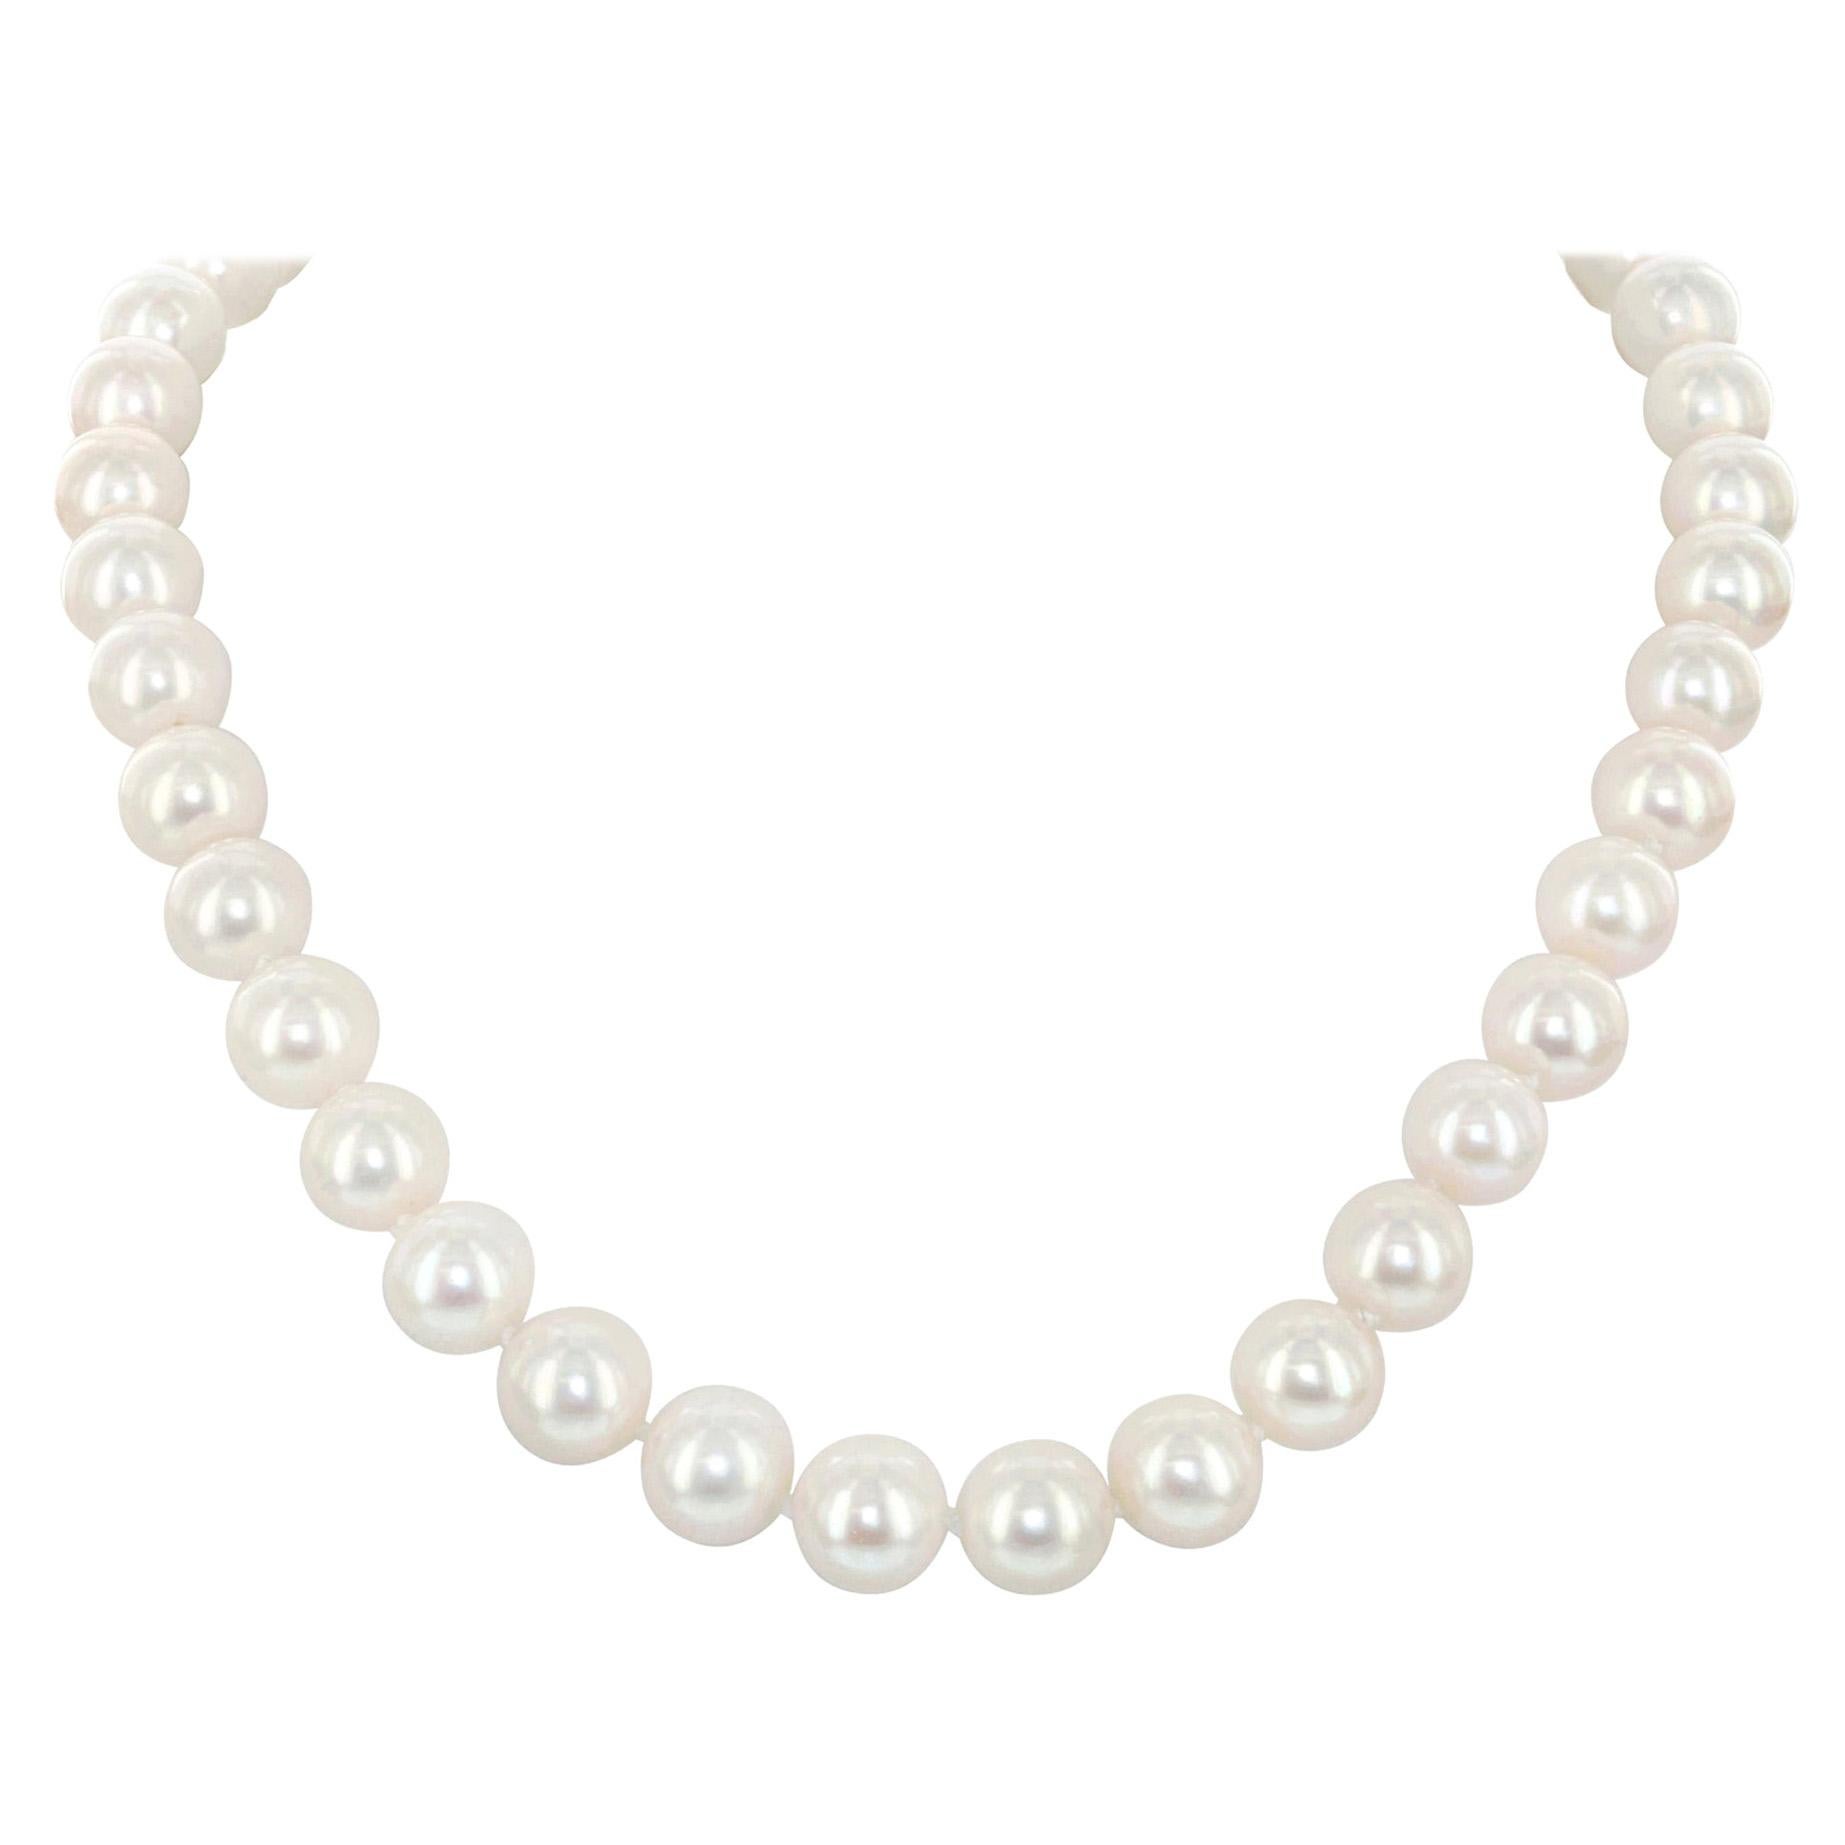 Cultured Freshwater 9.4x10.4mm Pearl Necklace with Silver Color Clasp